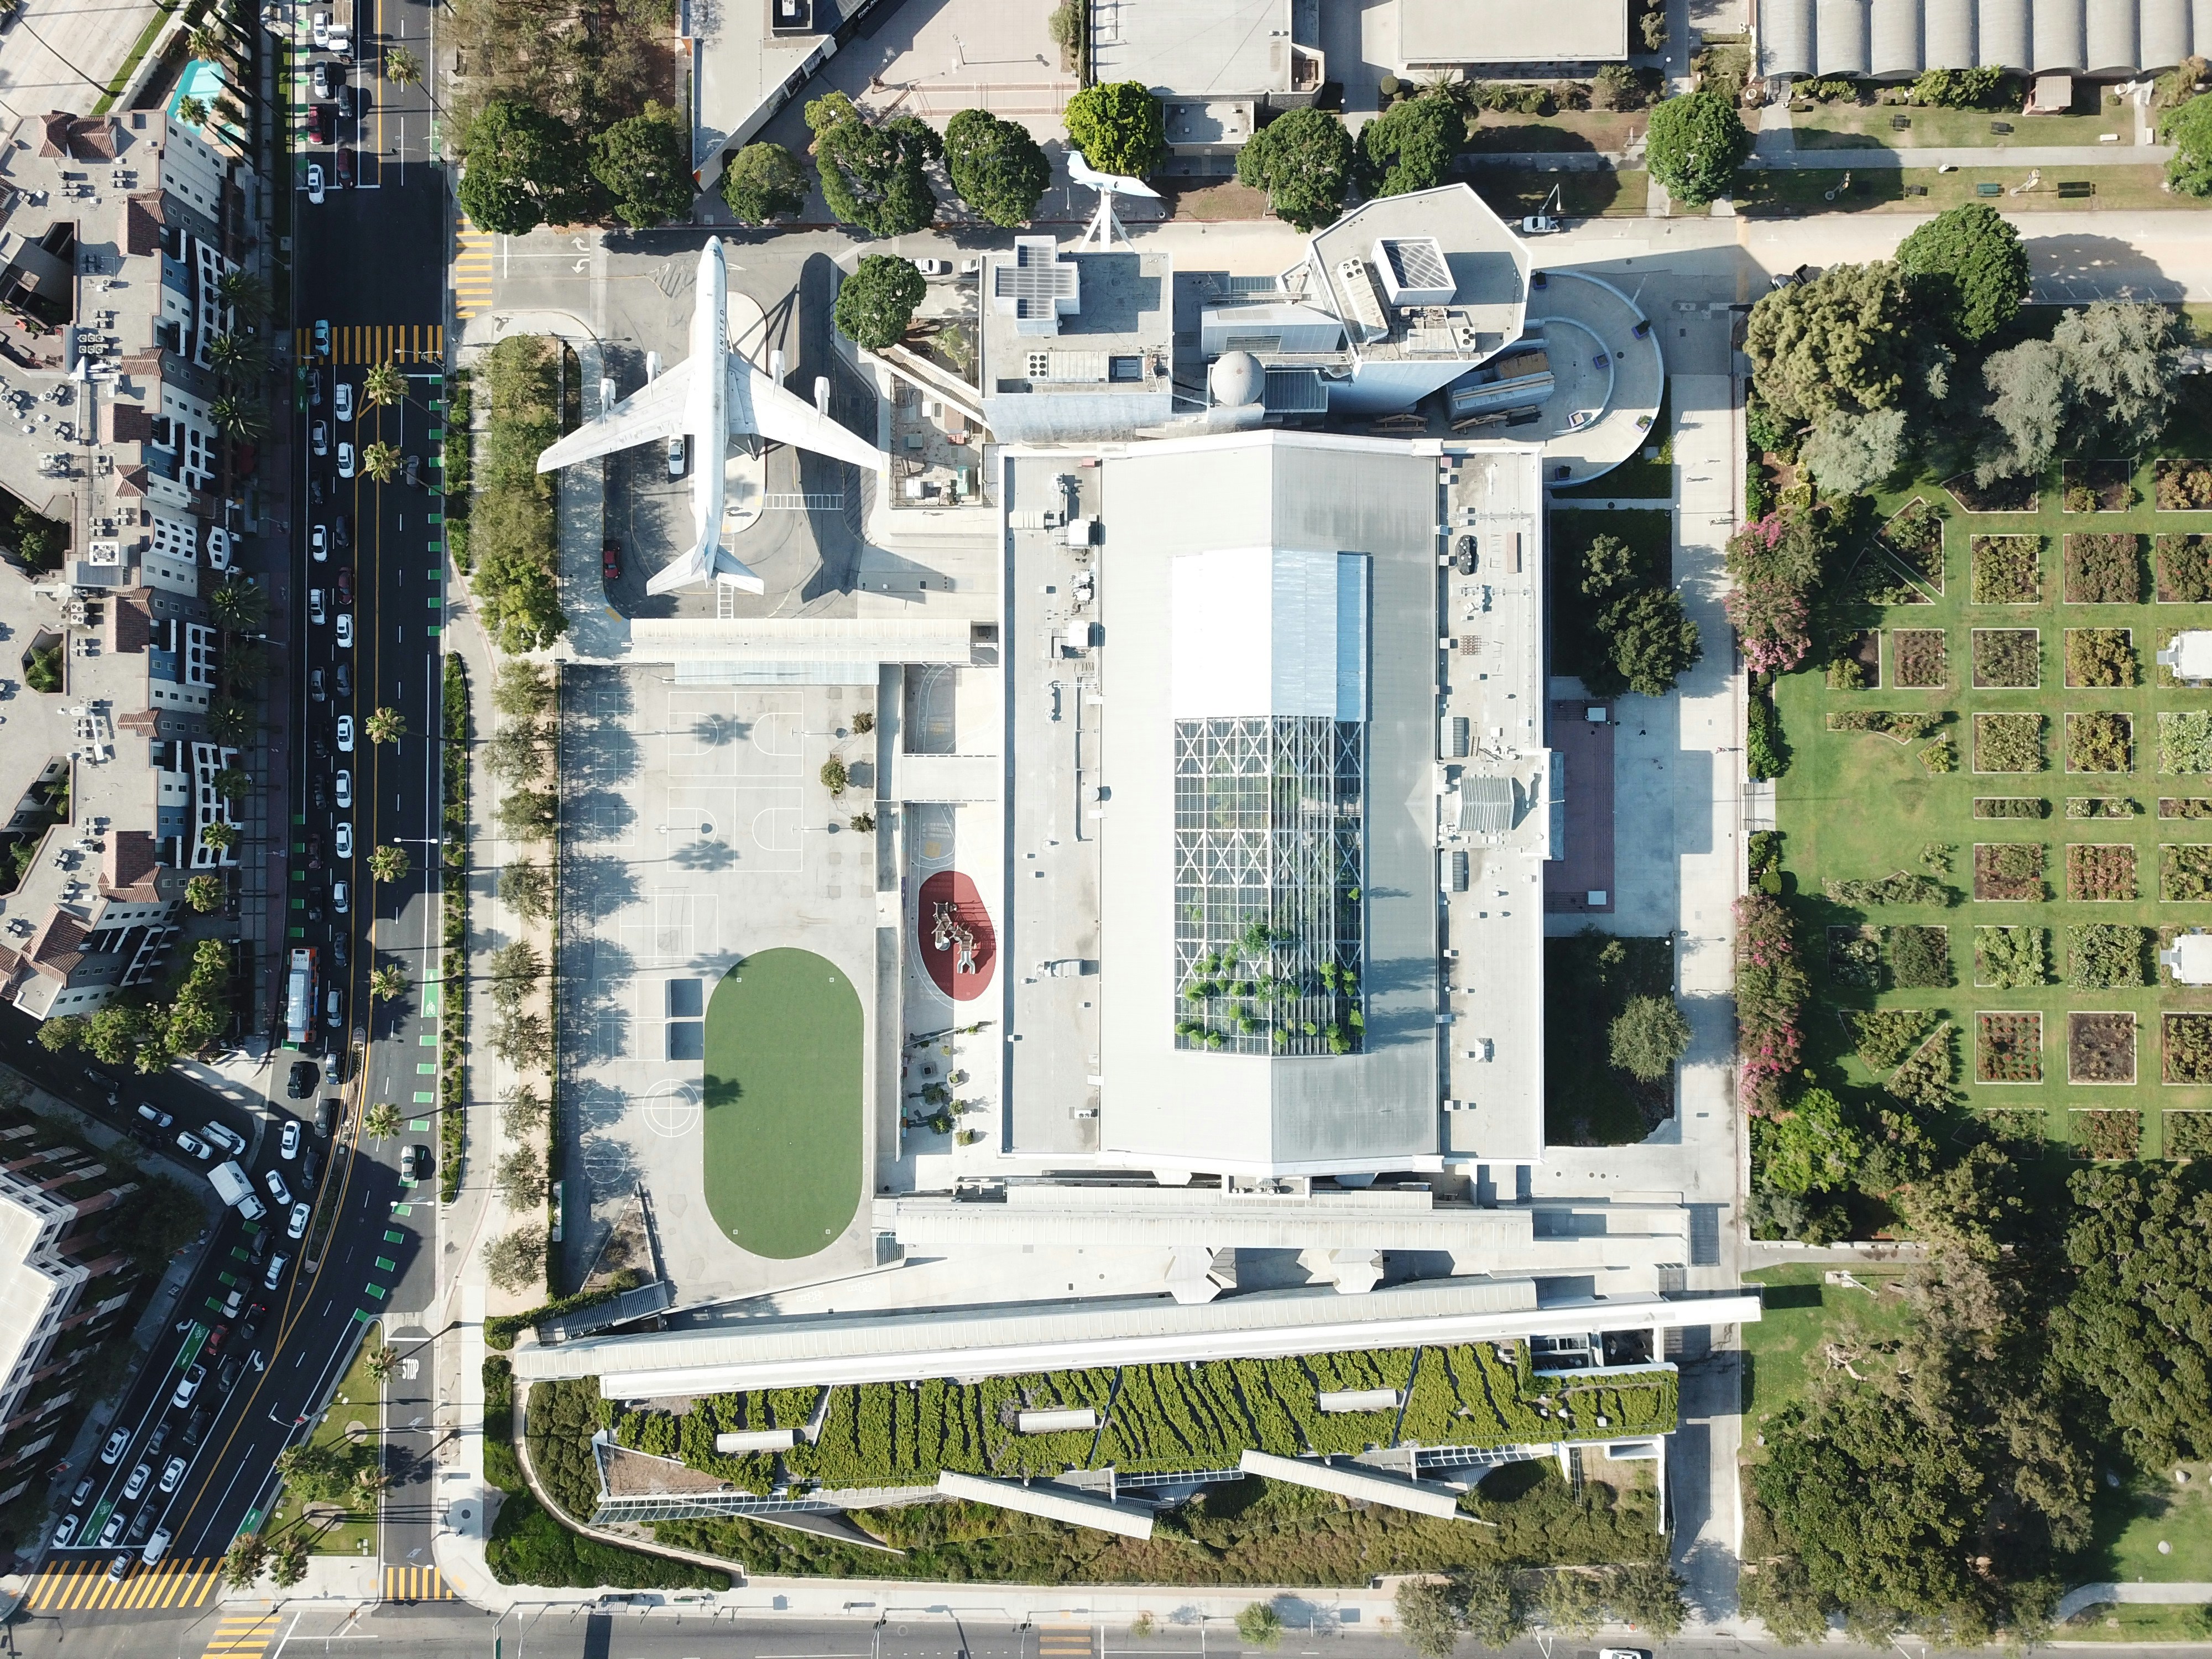 A unique topdown view from the University of Southern California, Dr. Theo. T. Alexander Jr. Science Center.